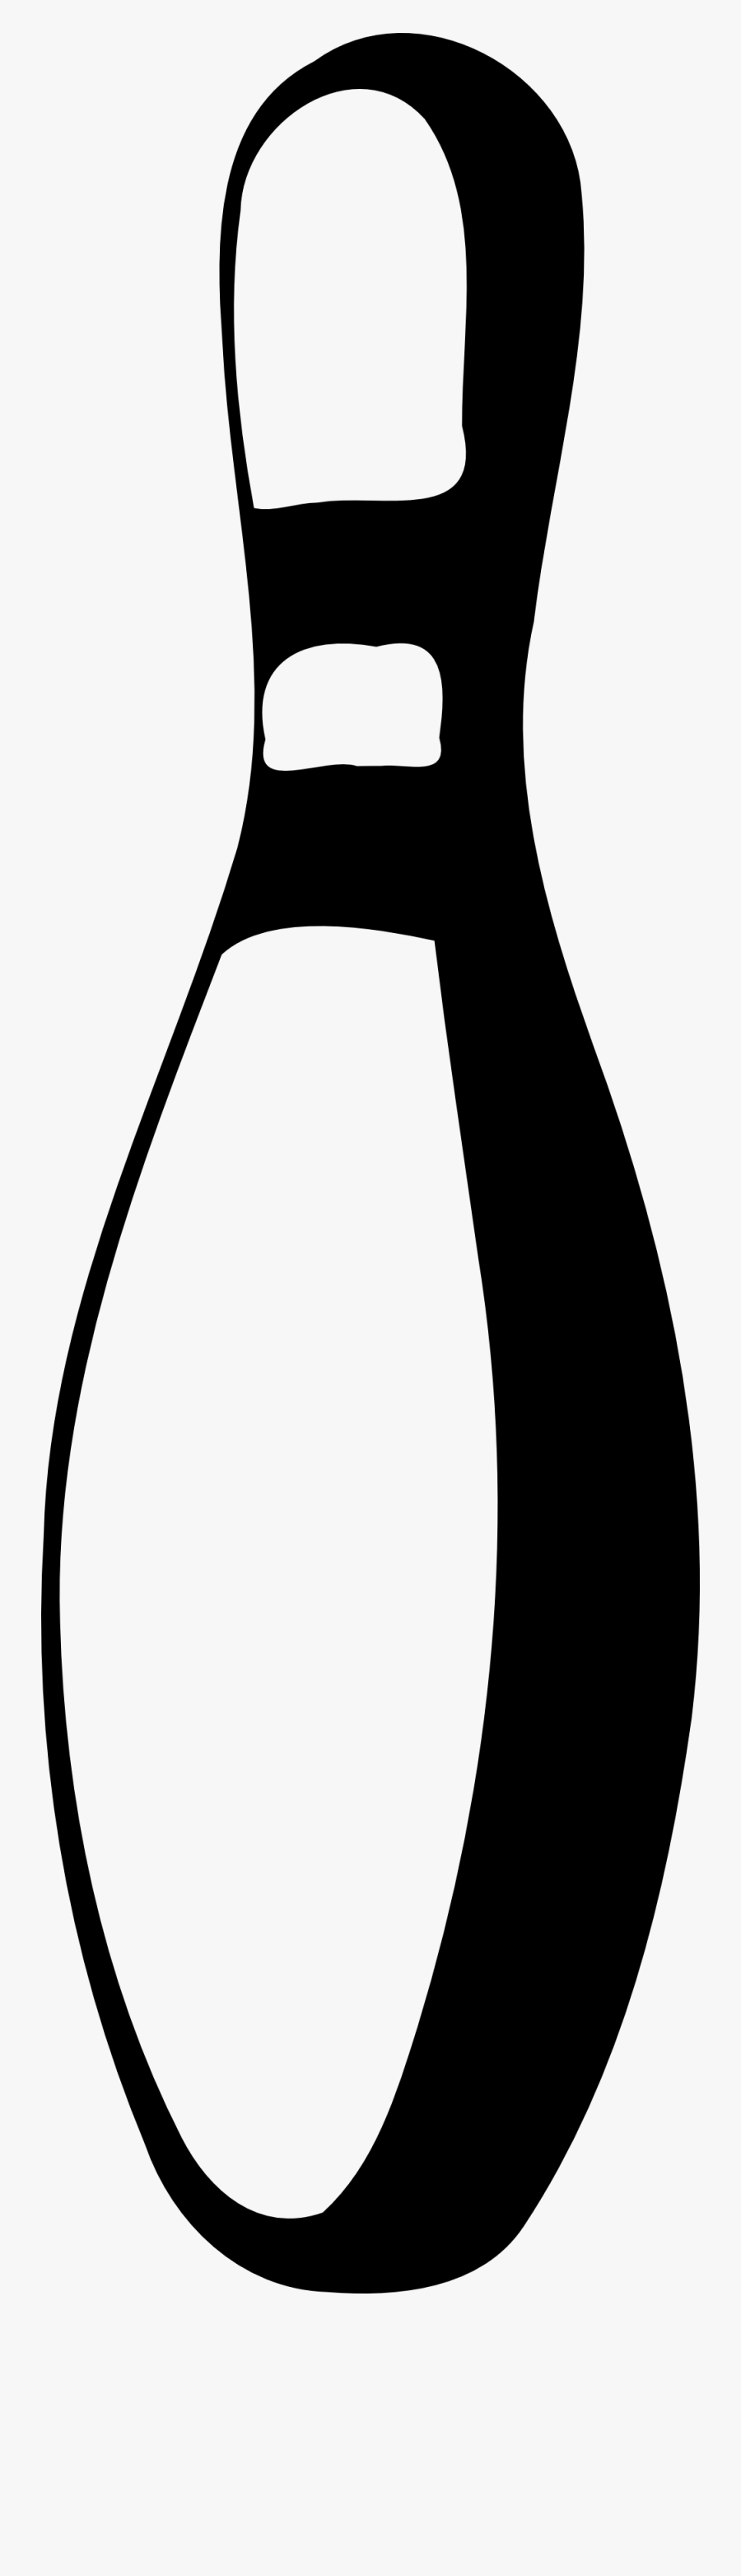 28 Collection Of Bowling Pin Clipart Black And White - Black White Bowling Pin, Transparent Clipart